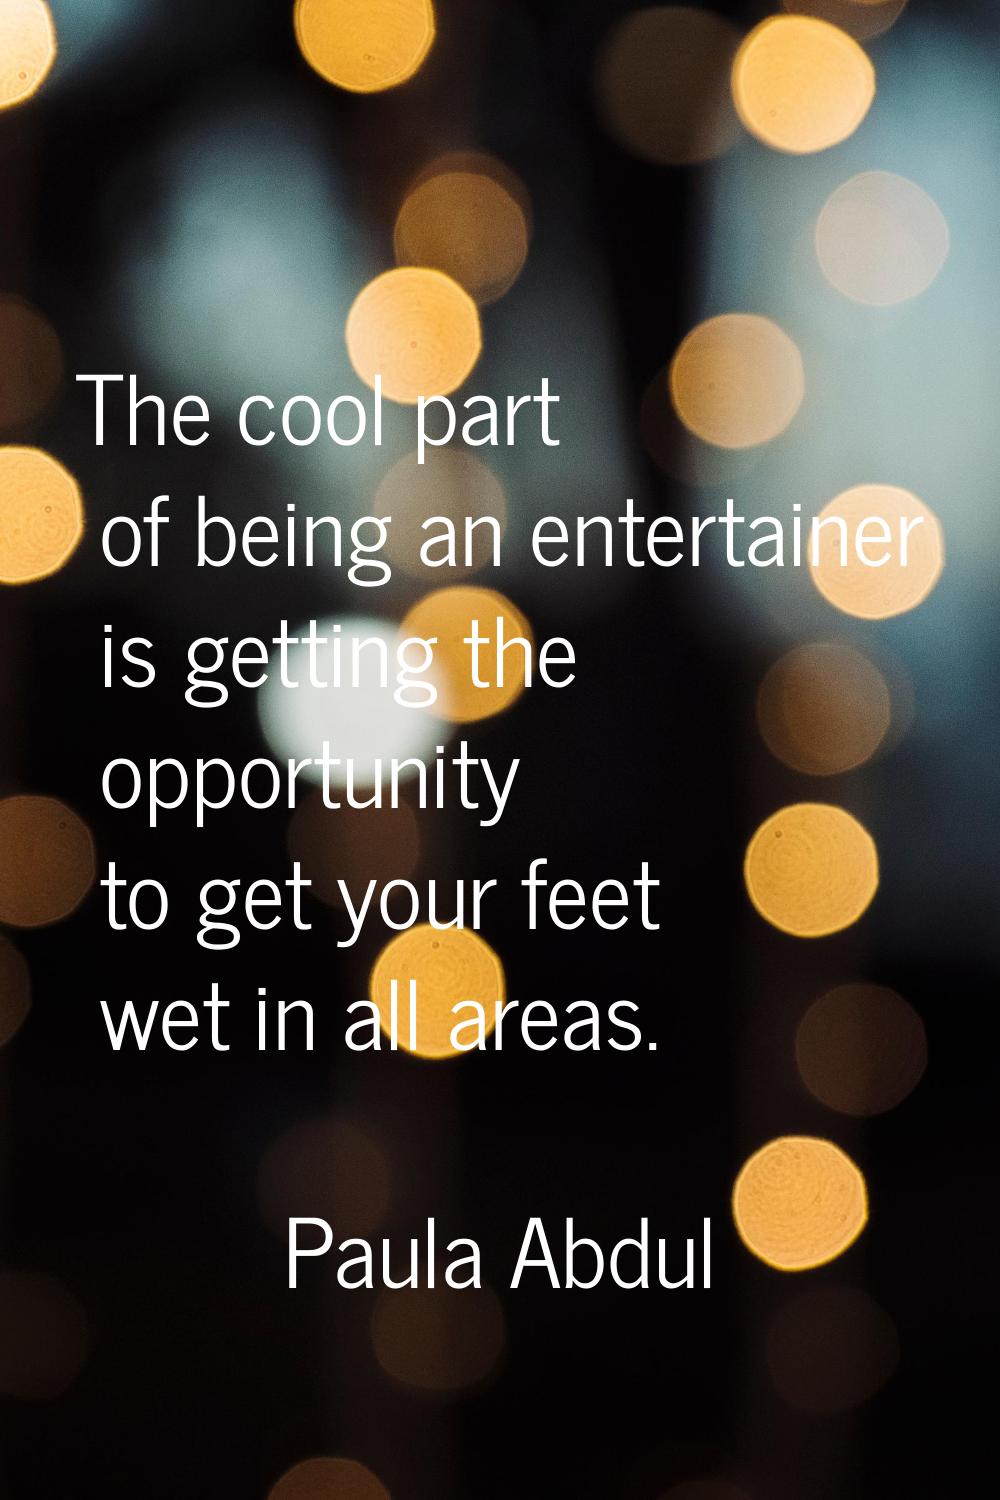 The cool part of being an entertainer is getting the opportunity to get your feet wet in all areas.